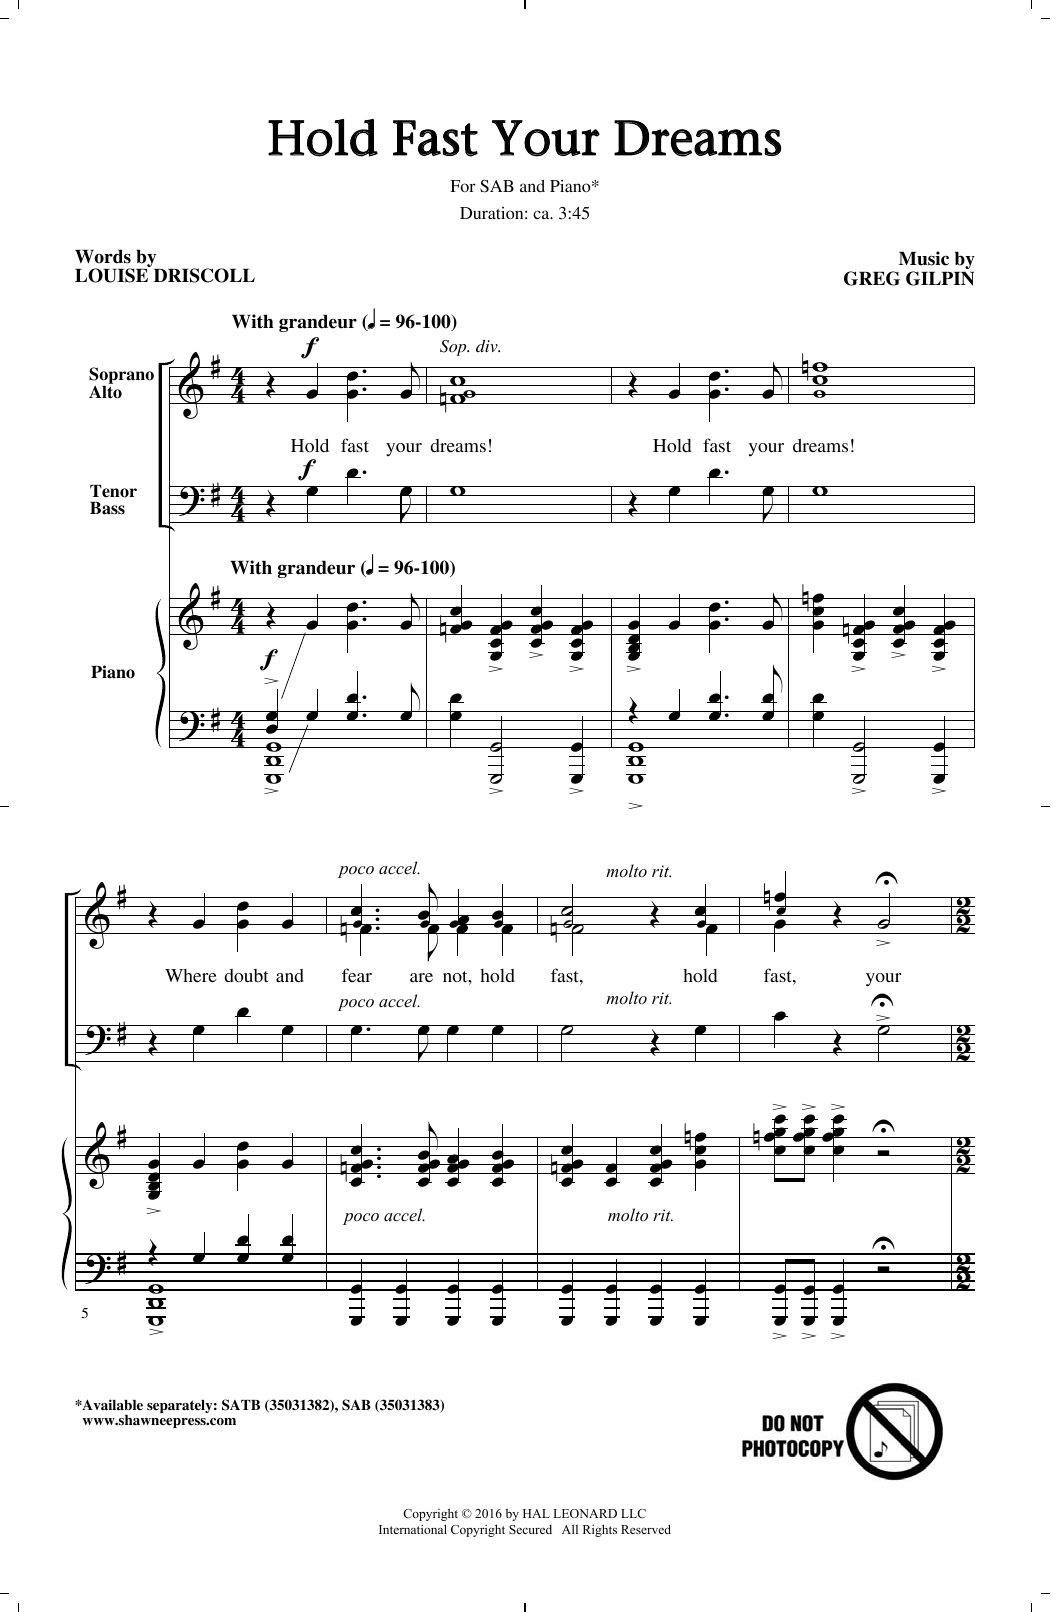 Louise Driscoll and Greg Gilpin Hold Fast Your Dreams! sheet music notes and chords. Download Printable PDF.